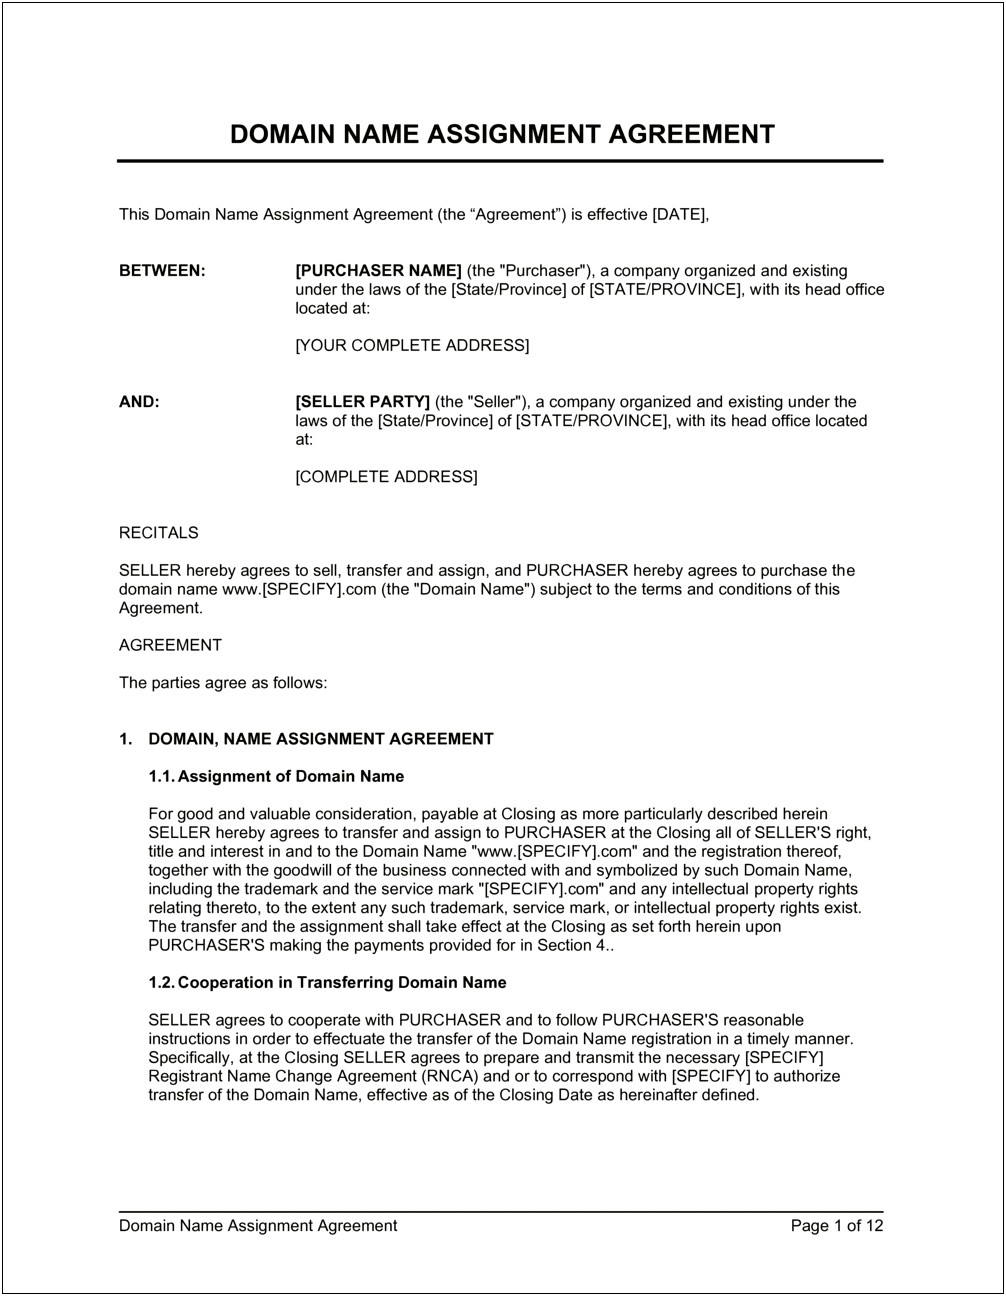 Free Domain Name Assignment Agreement Template